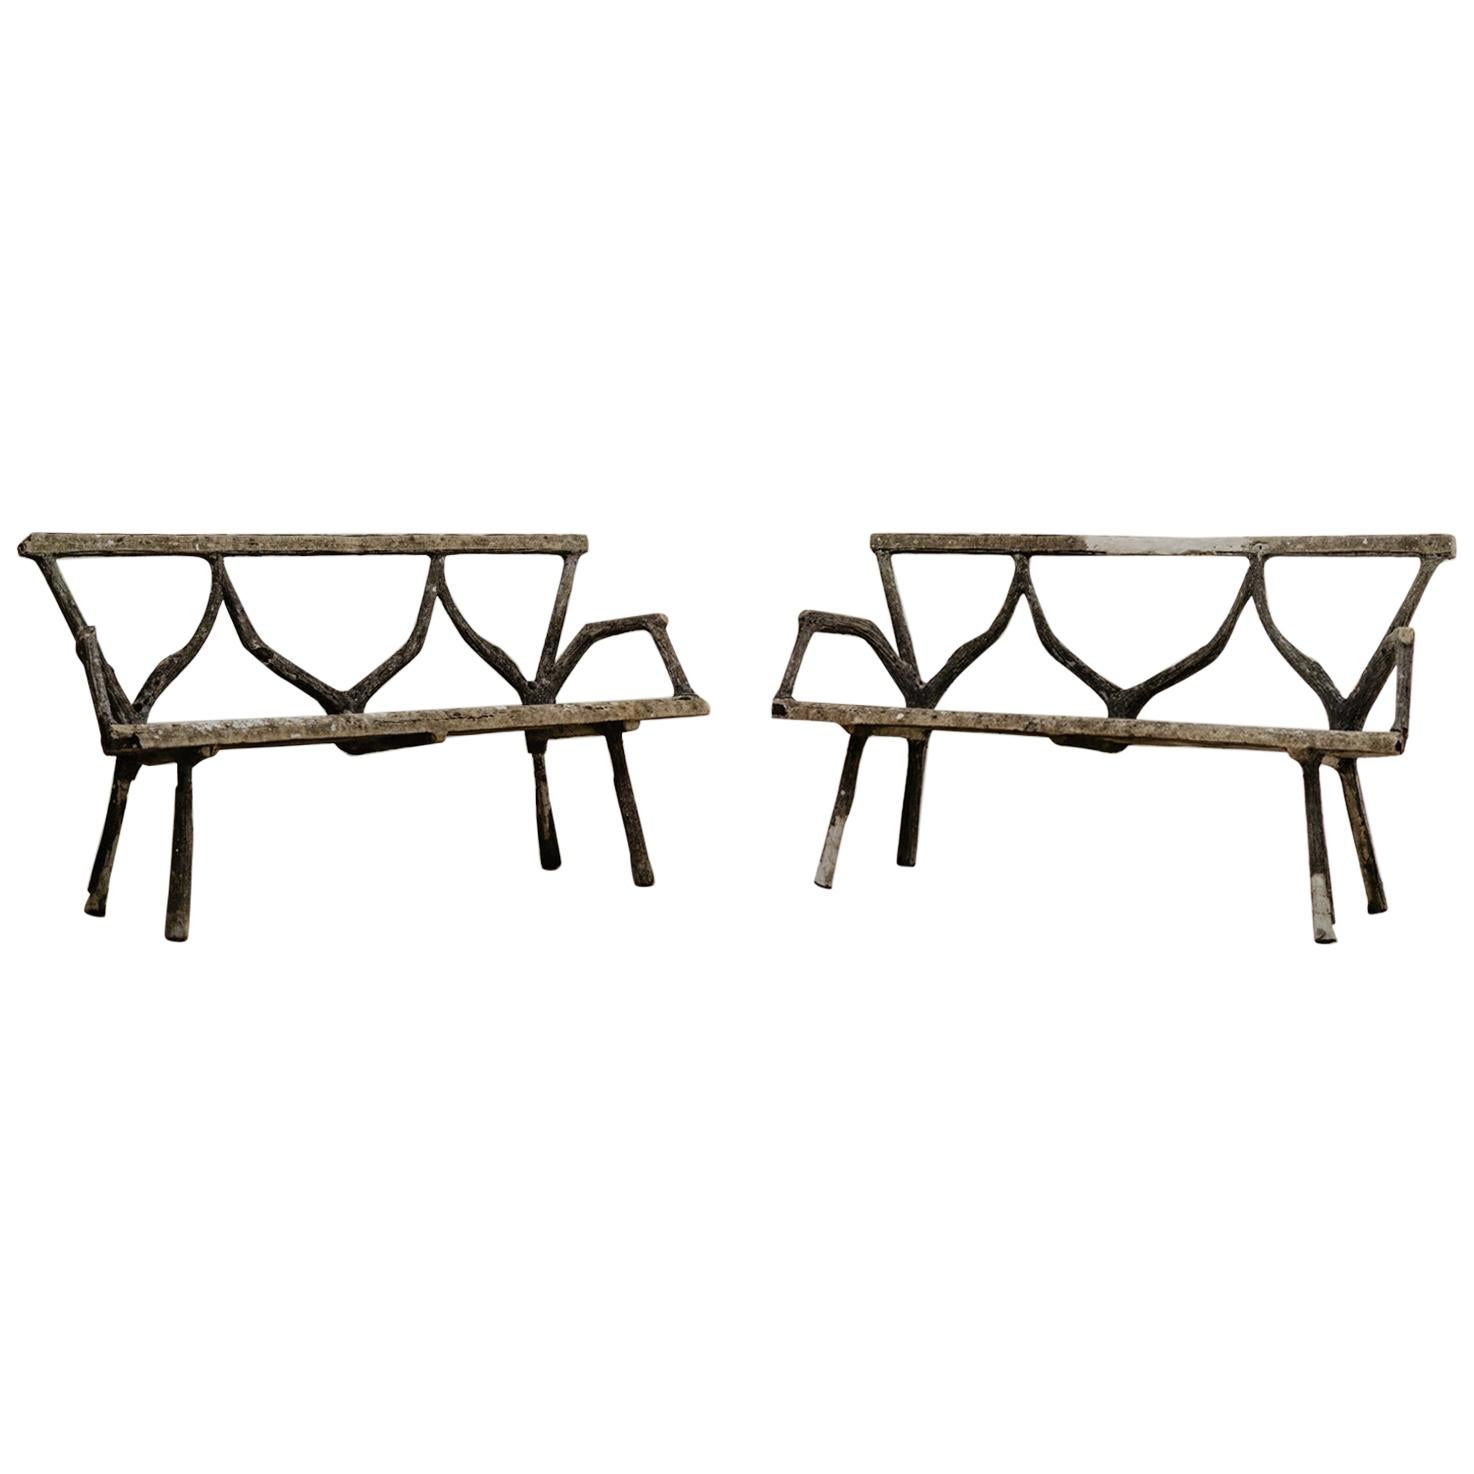 Pair of 19th Century Faux Bois Garden Benches